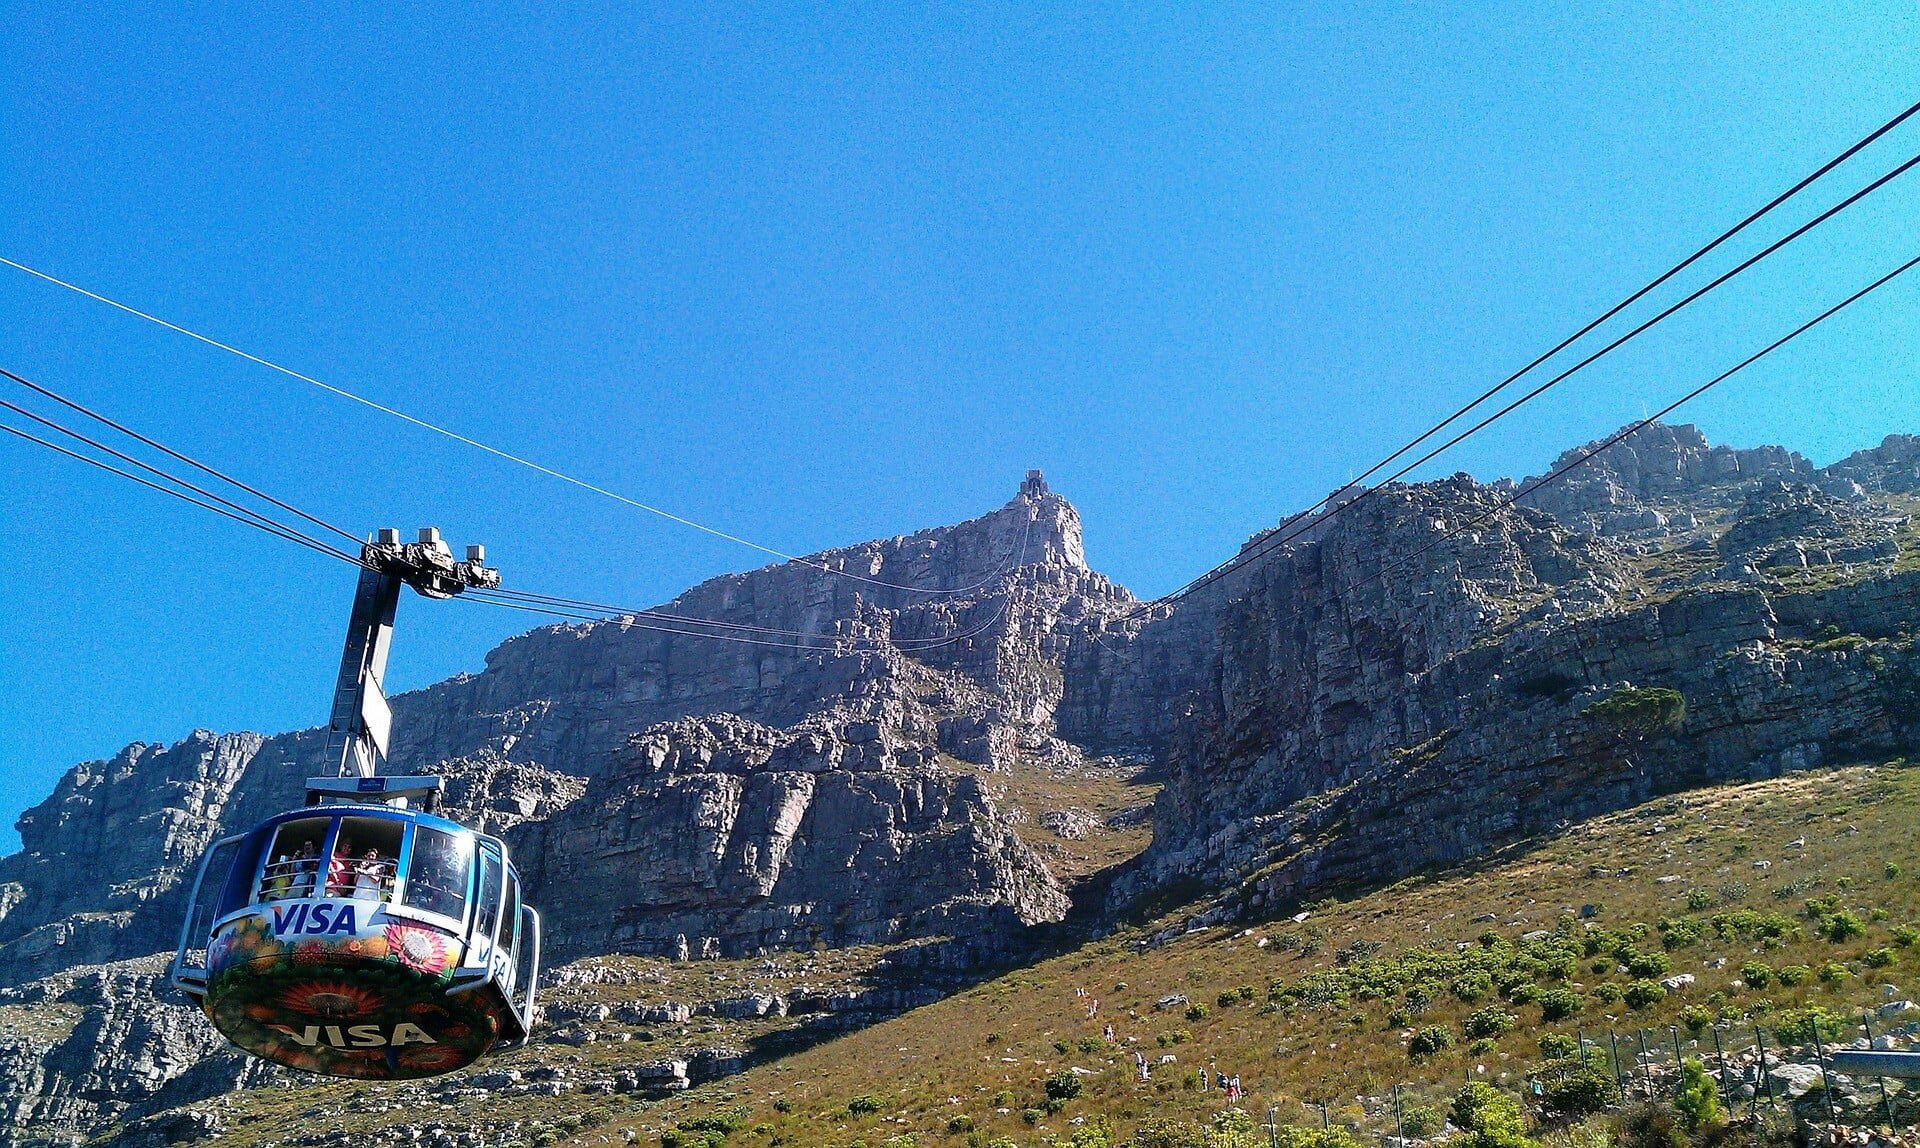 Taking the Cable Car up Table Mountain is an awesome day out!